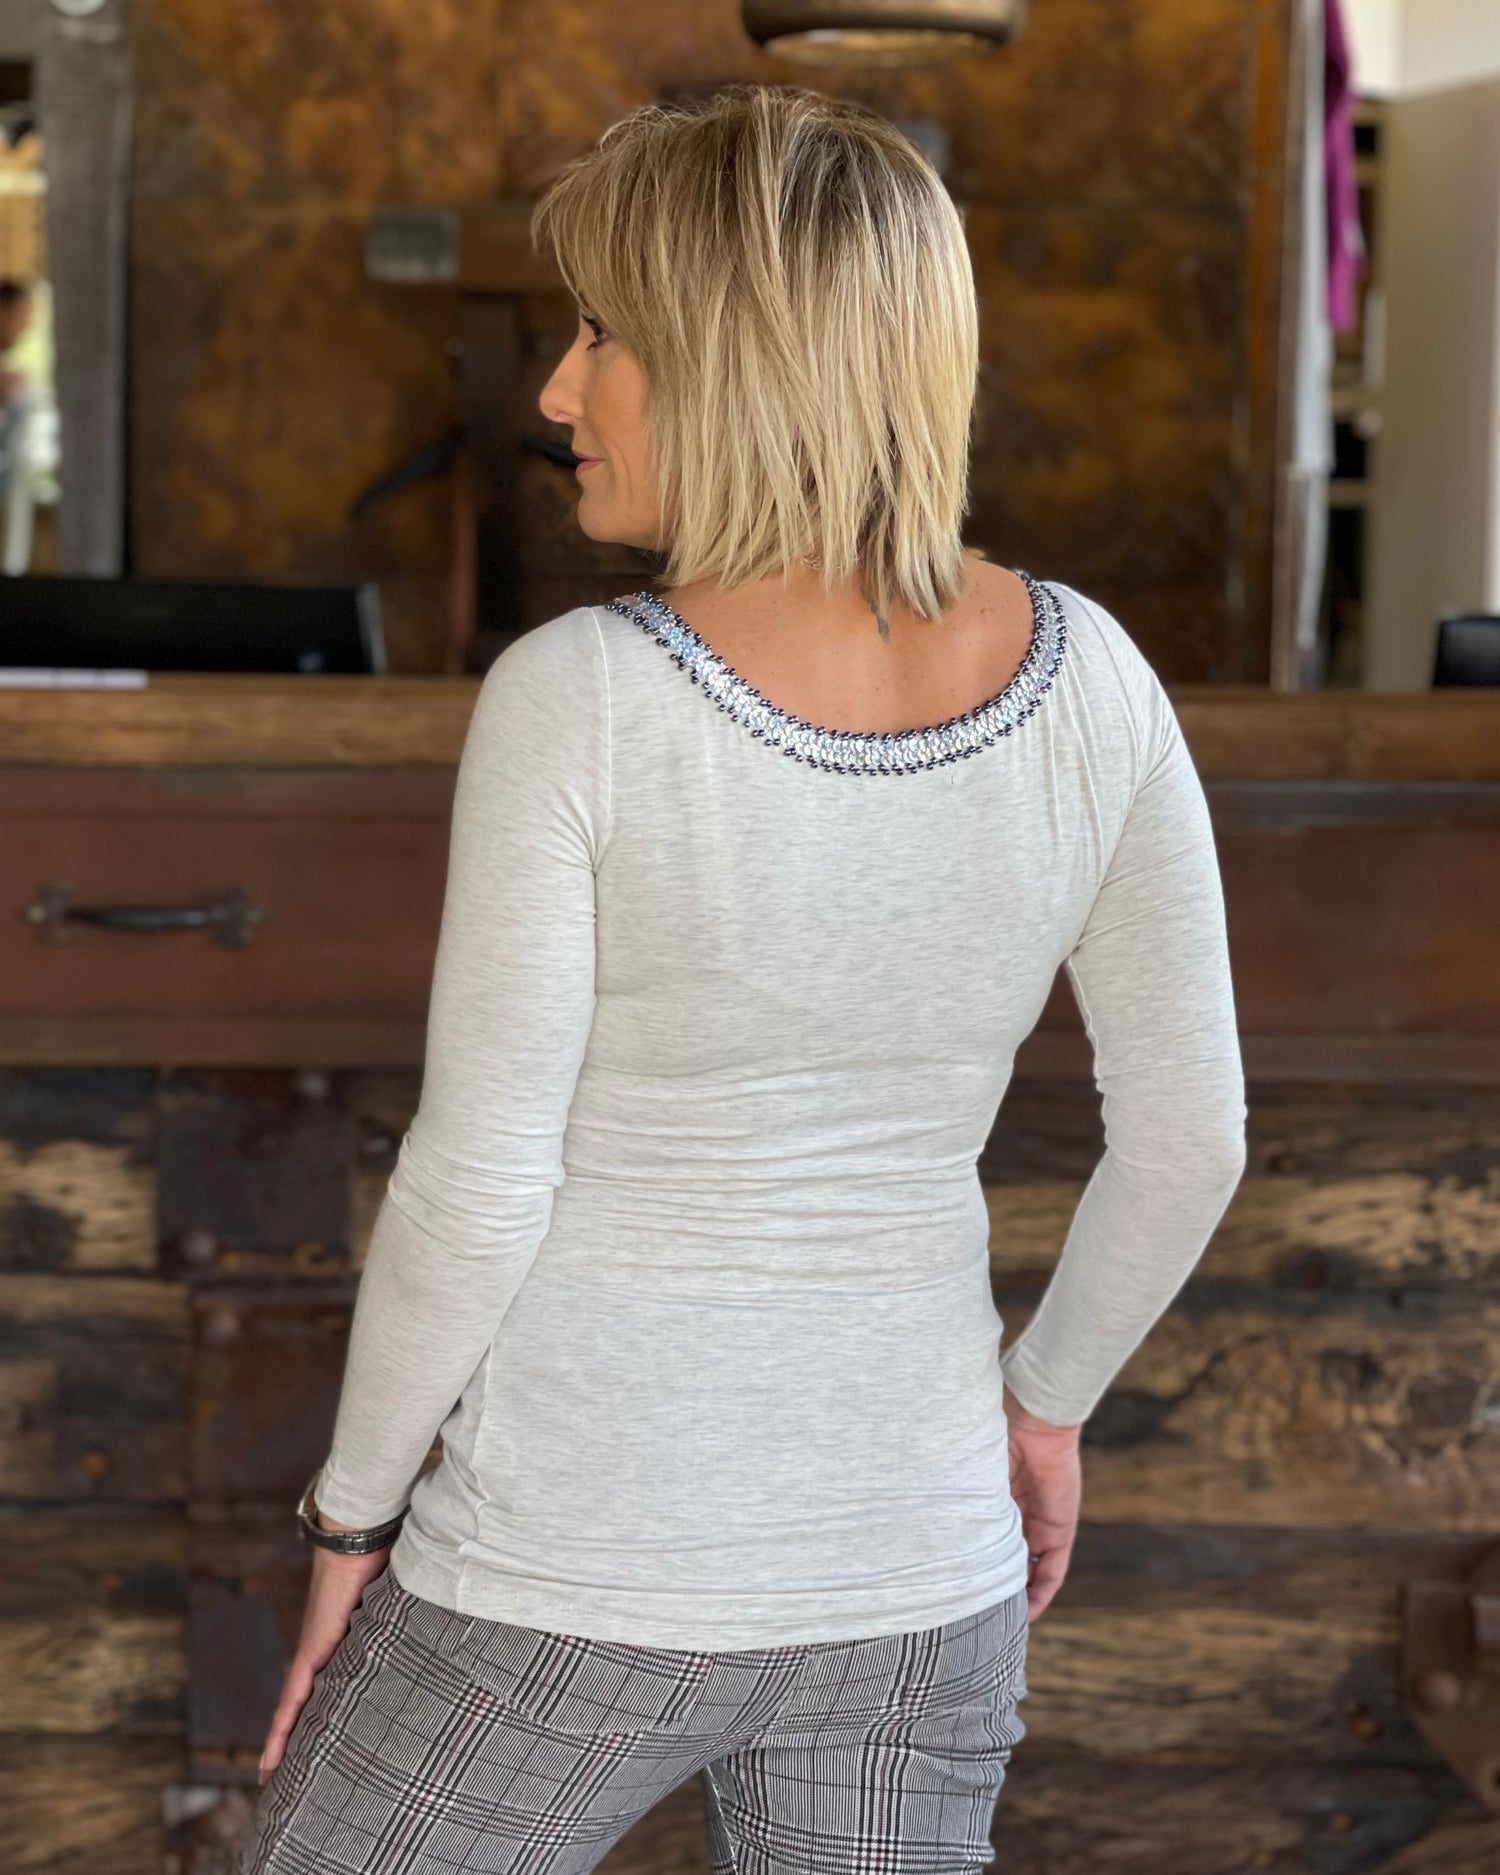 FINALLY! We have our Longsleeve Magic Cami's back in stock! The ever so popular basic Cami that you know and love. Available in 5 Colours to choose from. Stock up ladies as I'm sure they won't last long